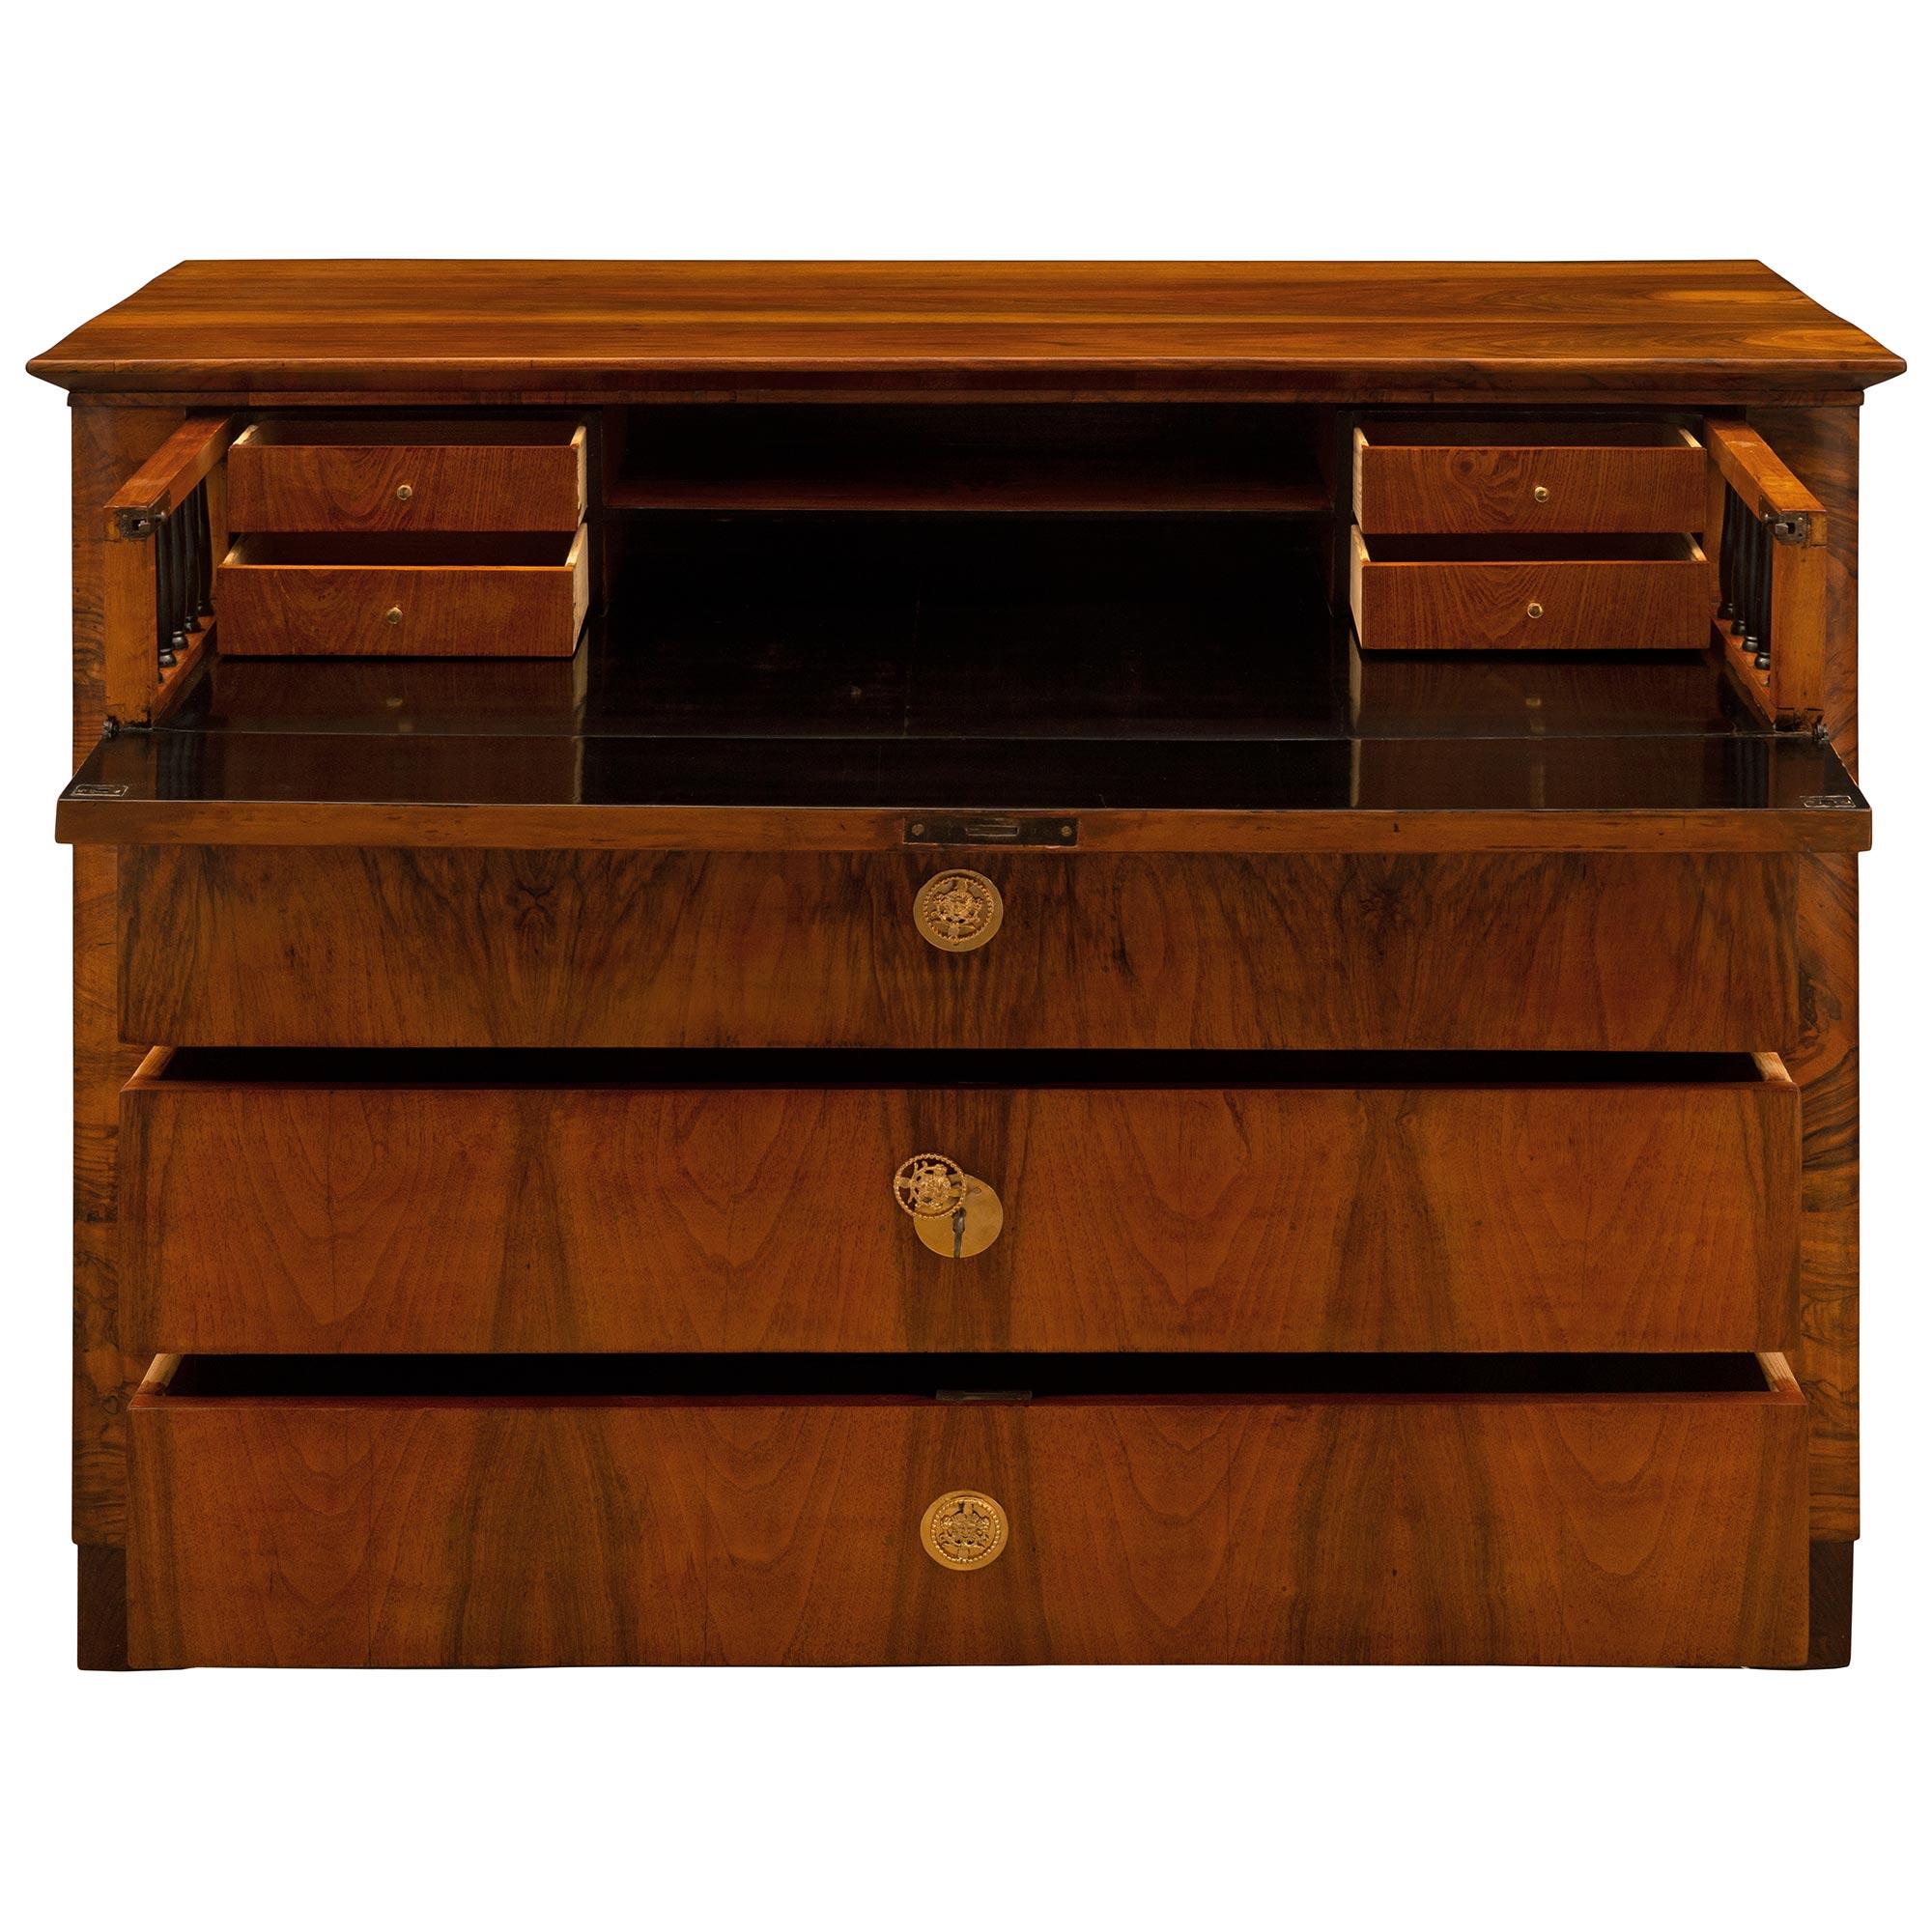 An exceptional and unique Continental 19th century Biedermeier st. flamed Mahogany, ebonized Fruitwood, and ormolu butler's desk/commode. The eight drawer chest is raised by square feet below the straight apron. At the center are four drawers